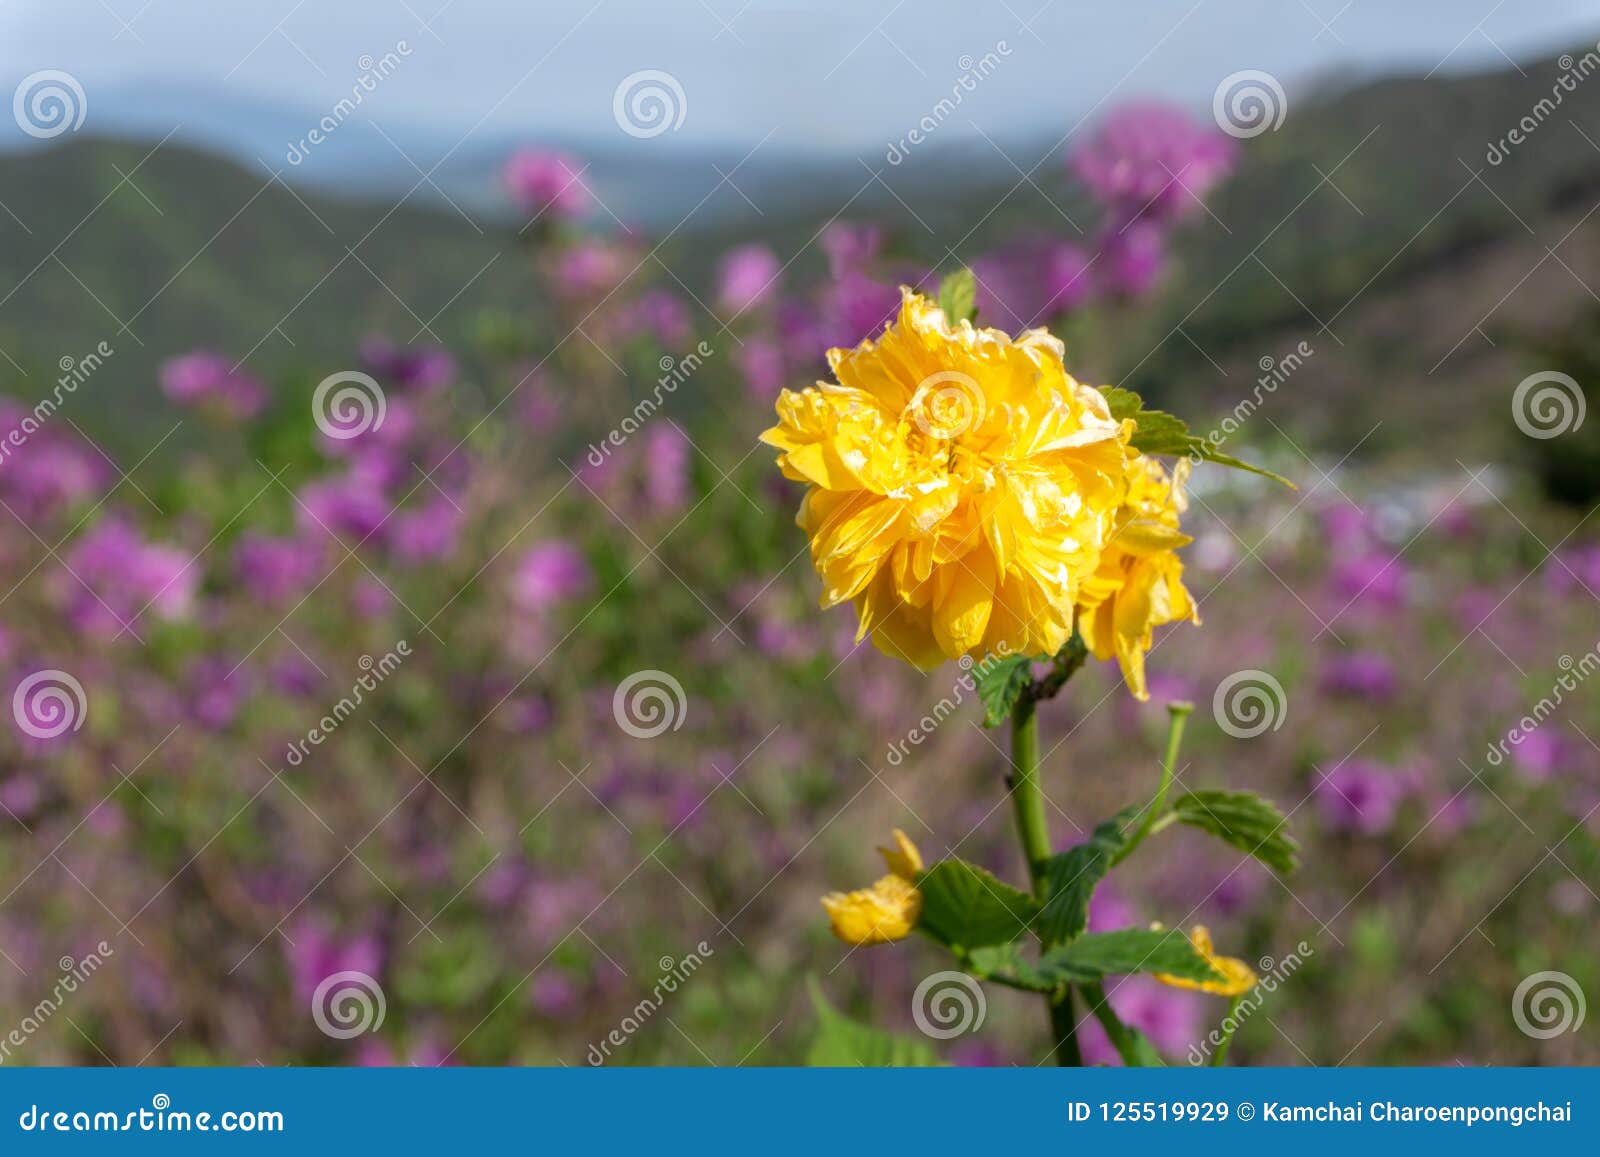 kerria japonica, the golden yellow flower blooms on the hillside in hwangmaesan country park